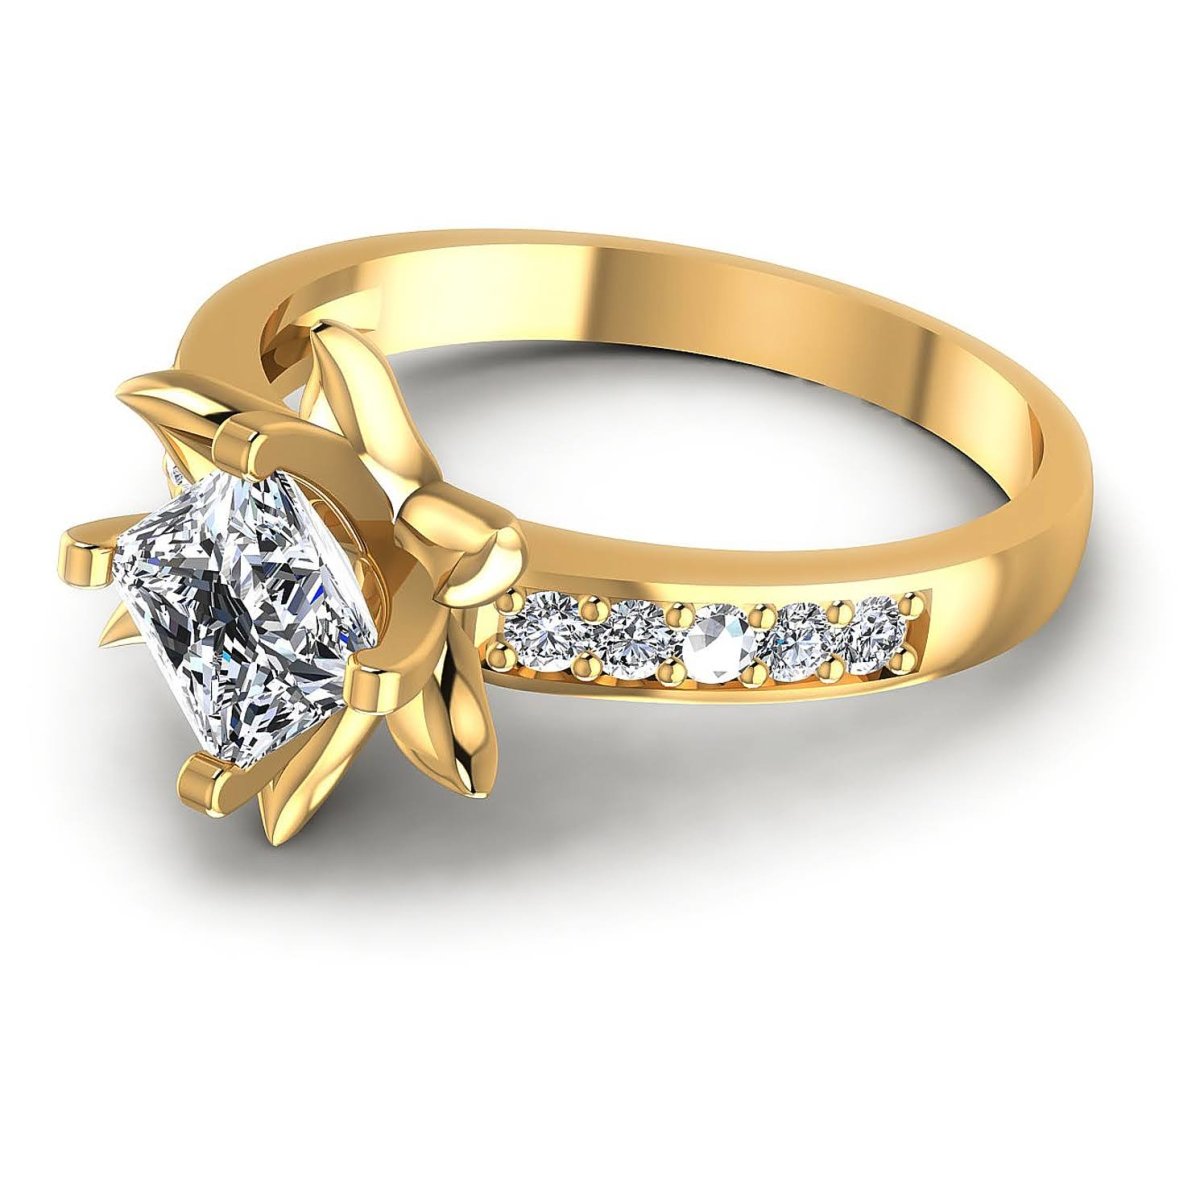 Special 0.80CT Princess and Round Cut Diamond Engagement Ring in 18kt Yellow Gold - Primestyle.com